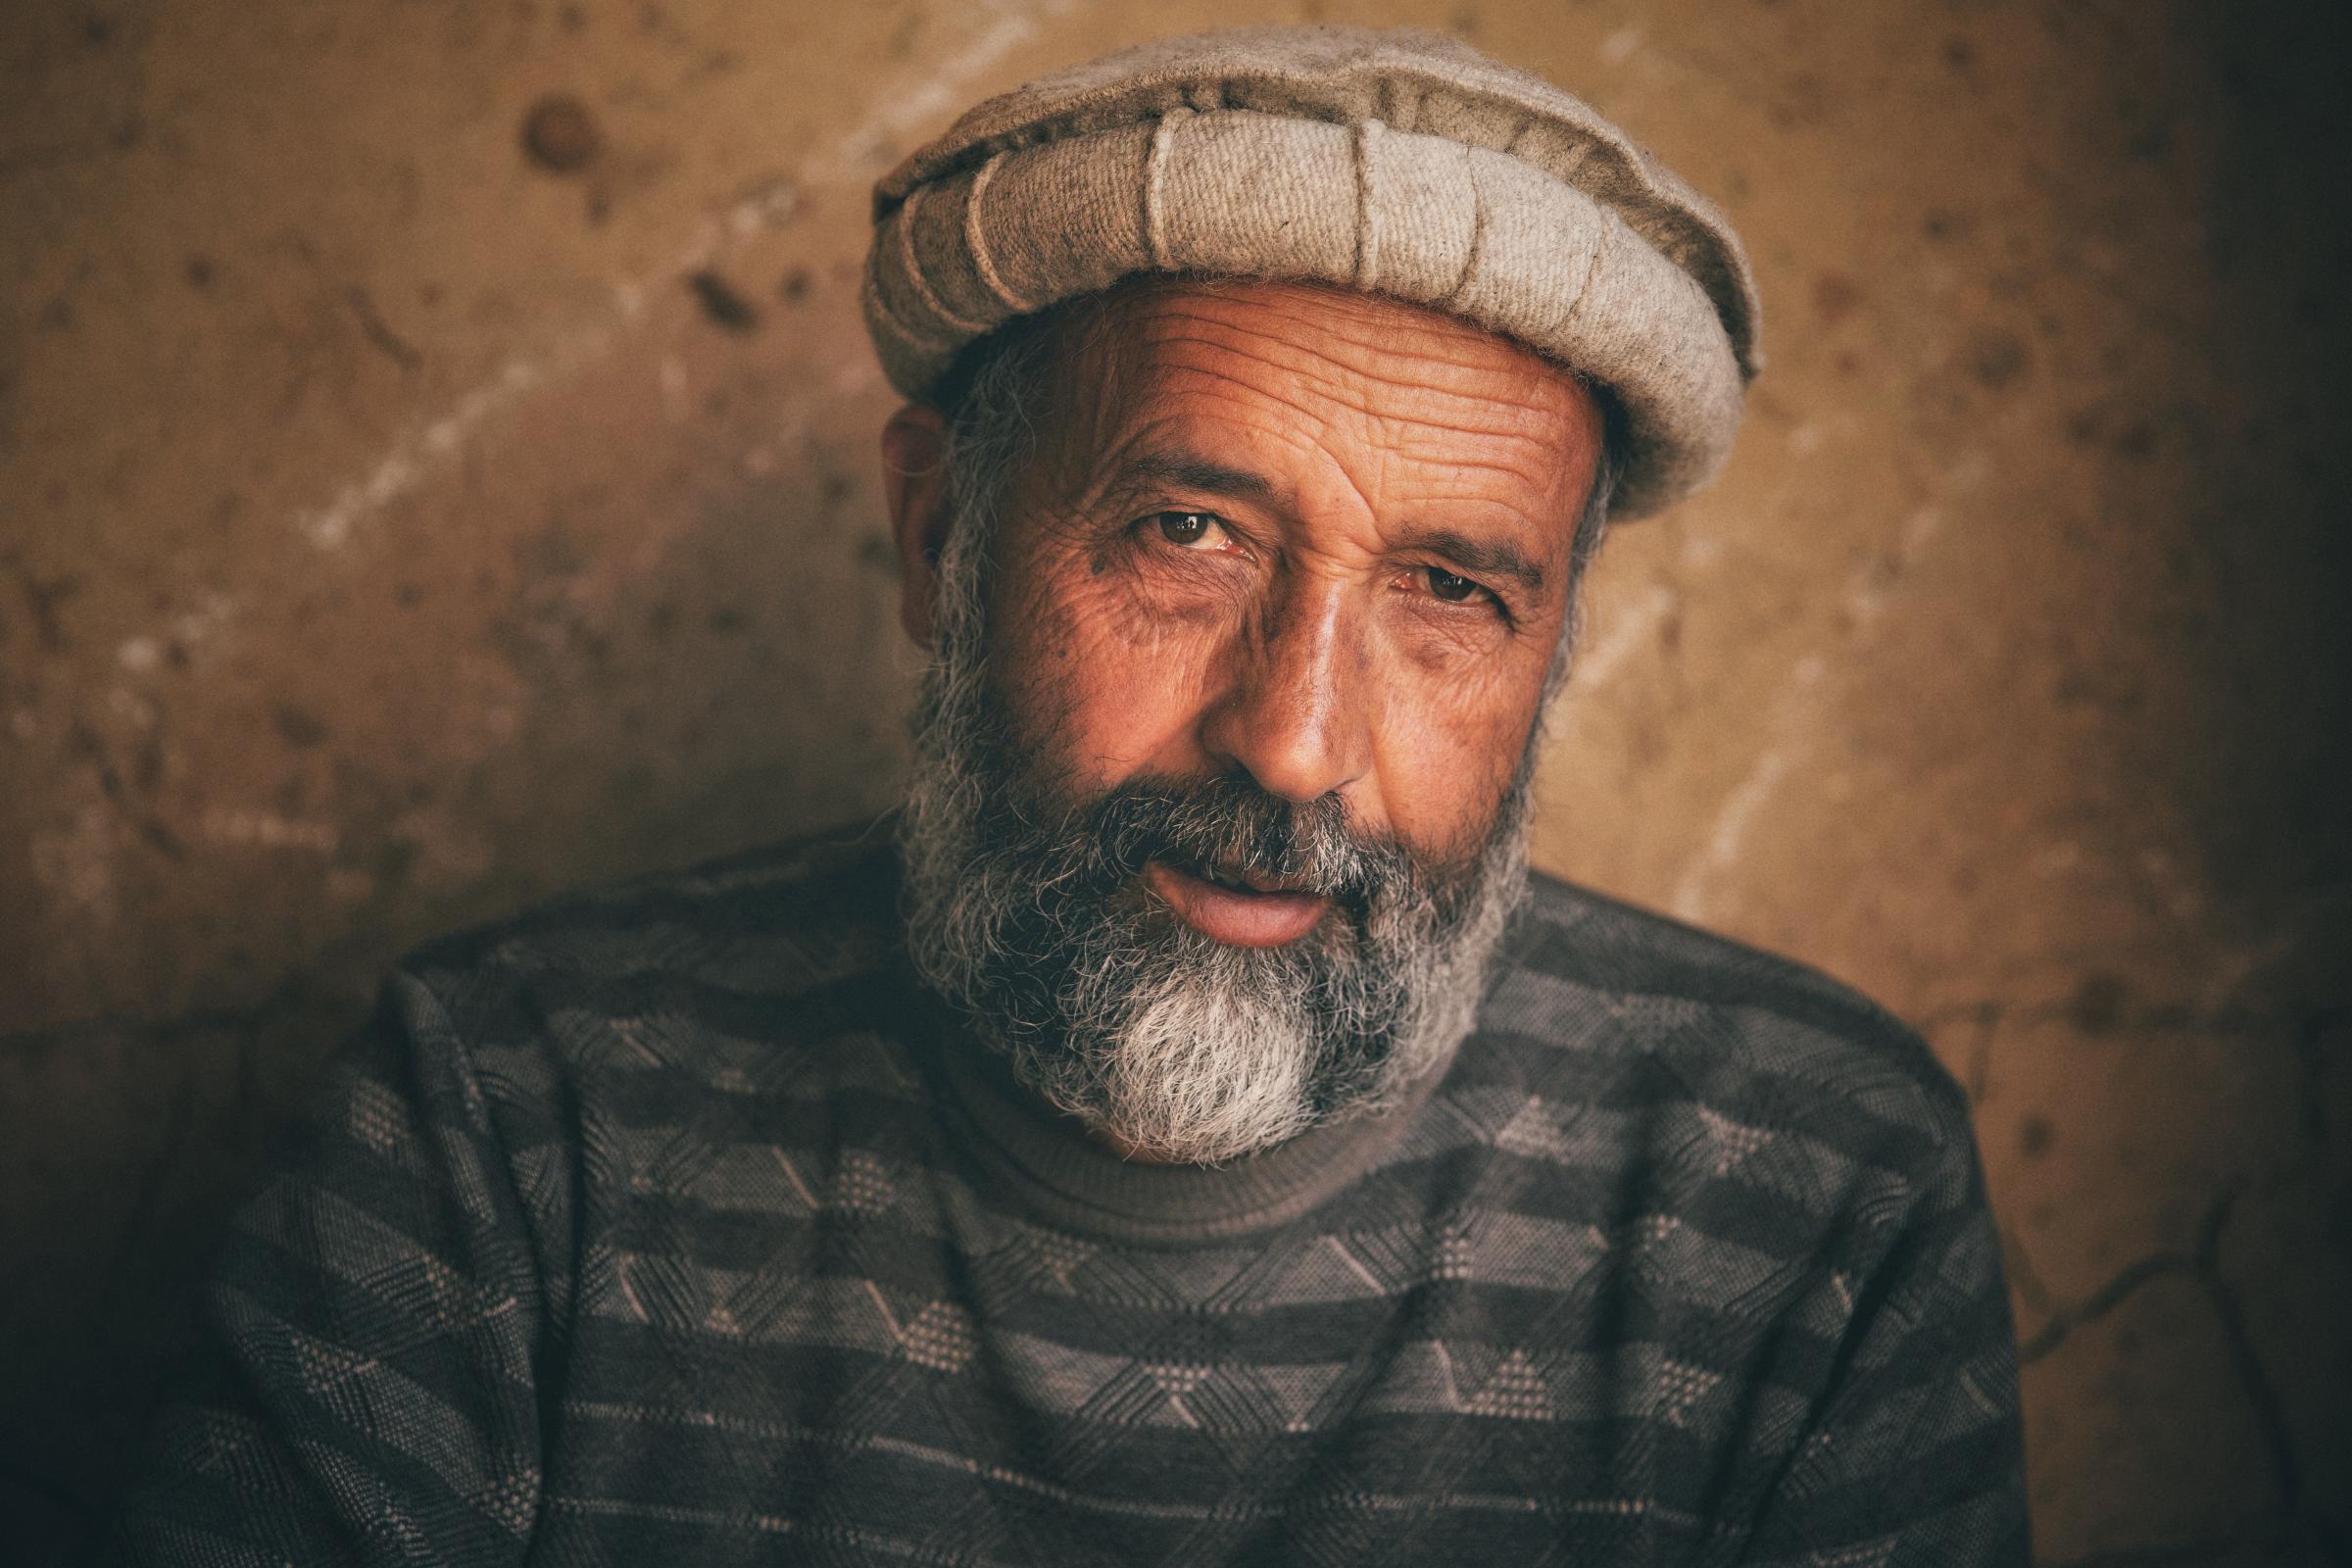 Two centuries of living with the people of Afghanistan - A collection of 200 portraits of Afghan people that each portrait interprets the narrative of one...